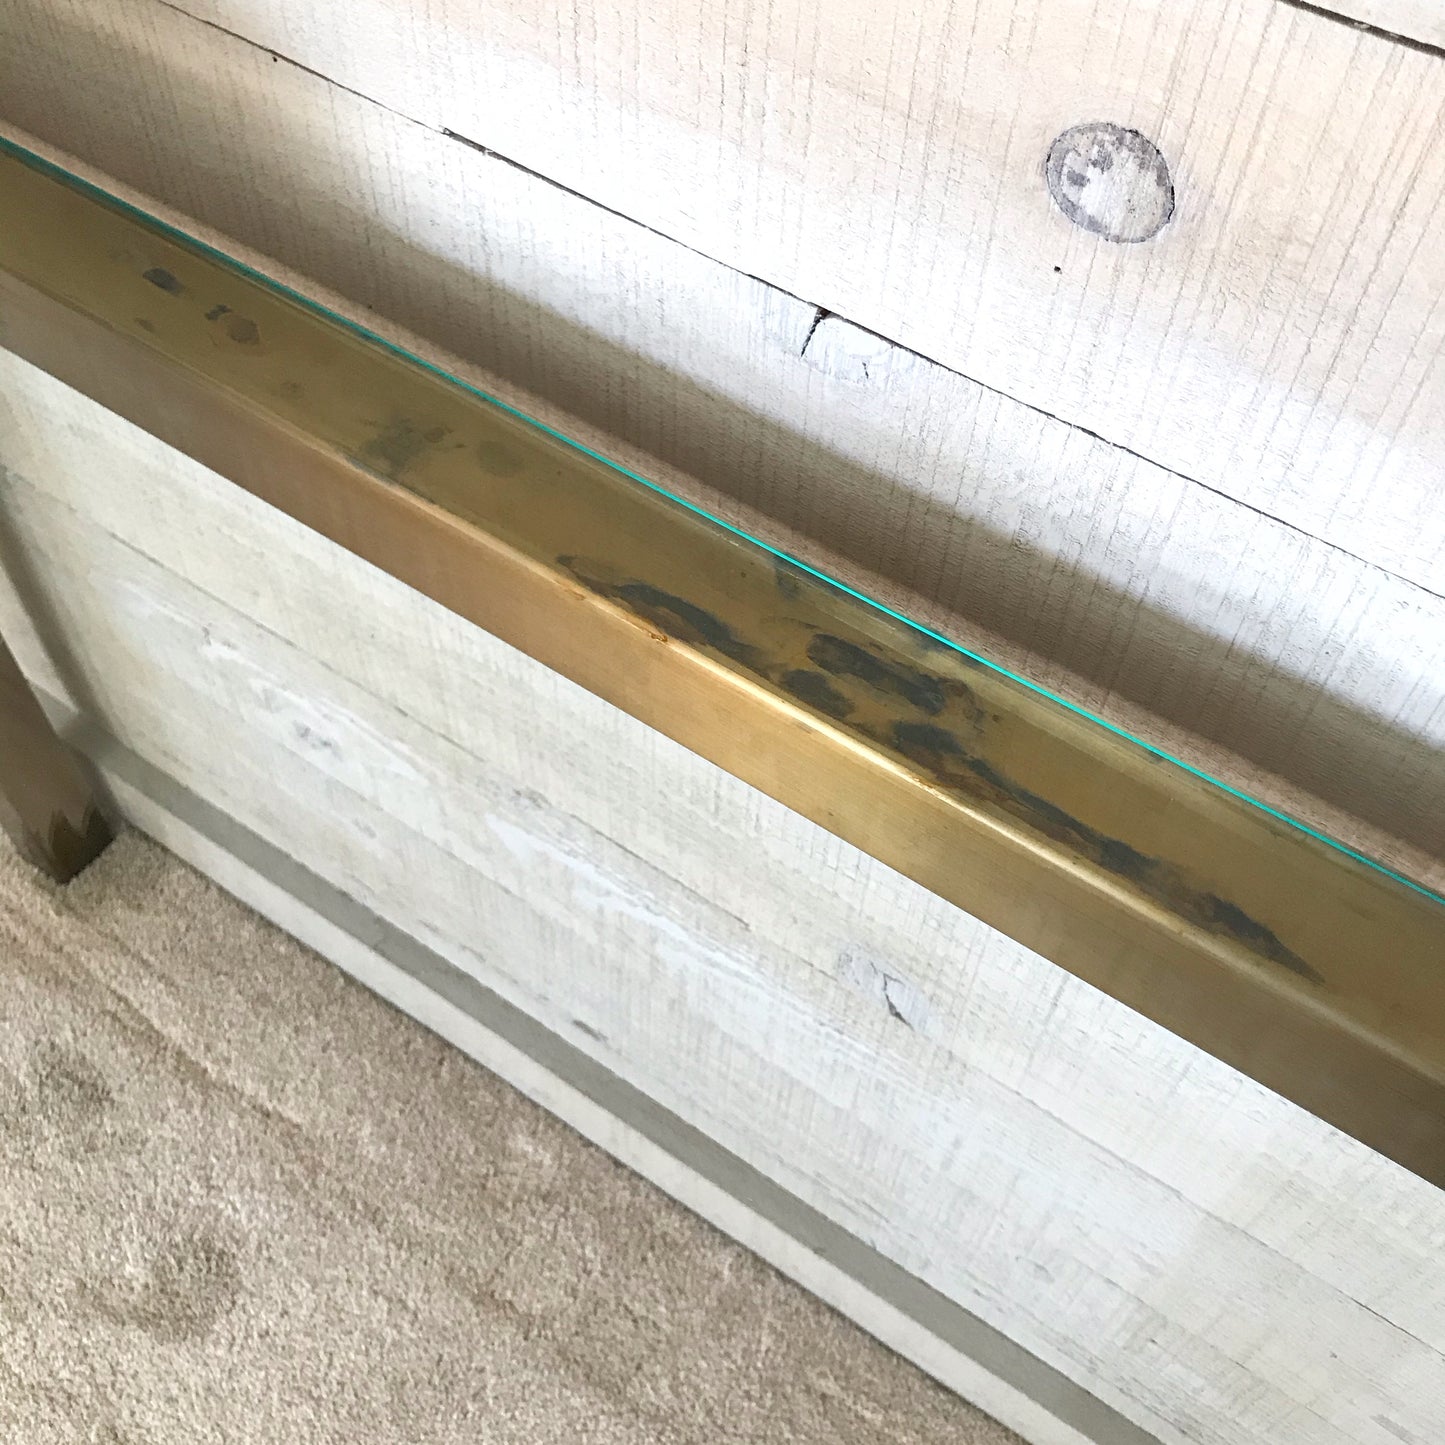 Vintage Gold + Glass Parsons Console Table